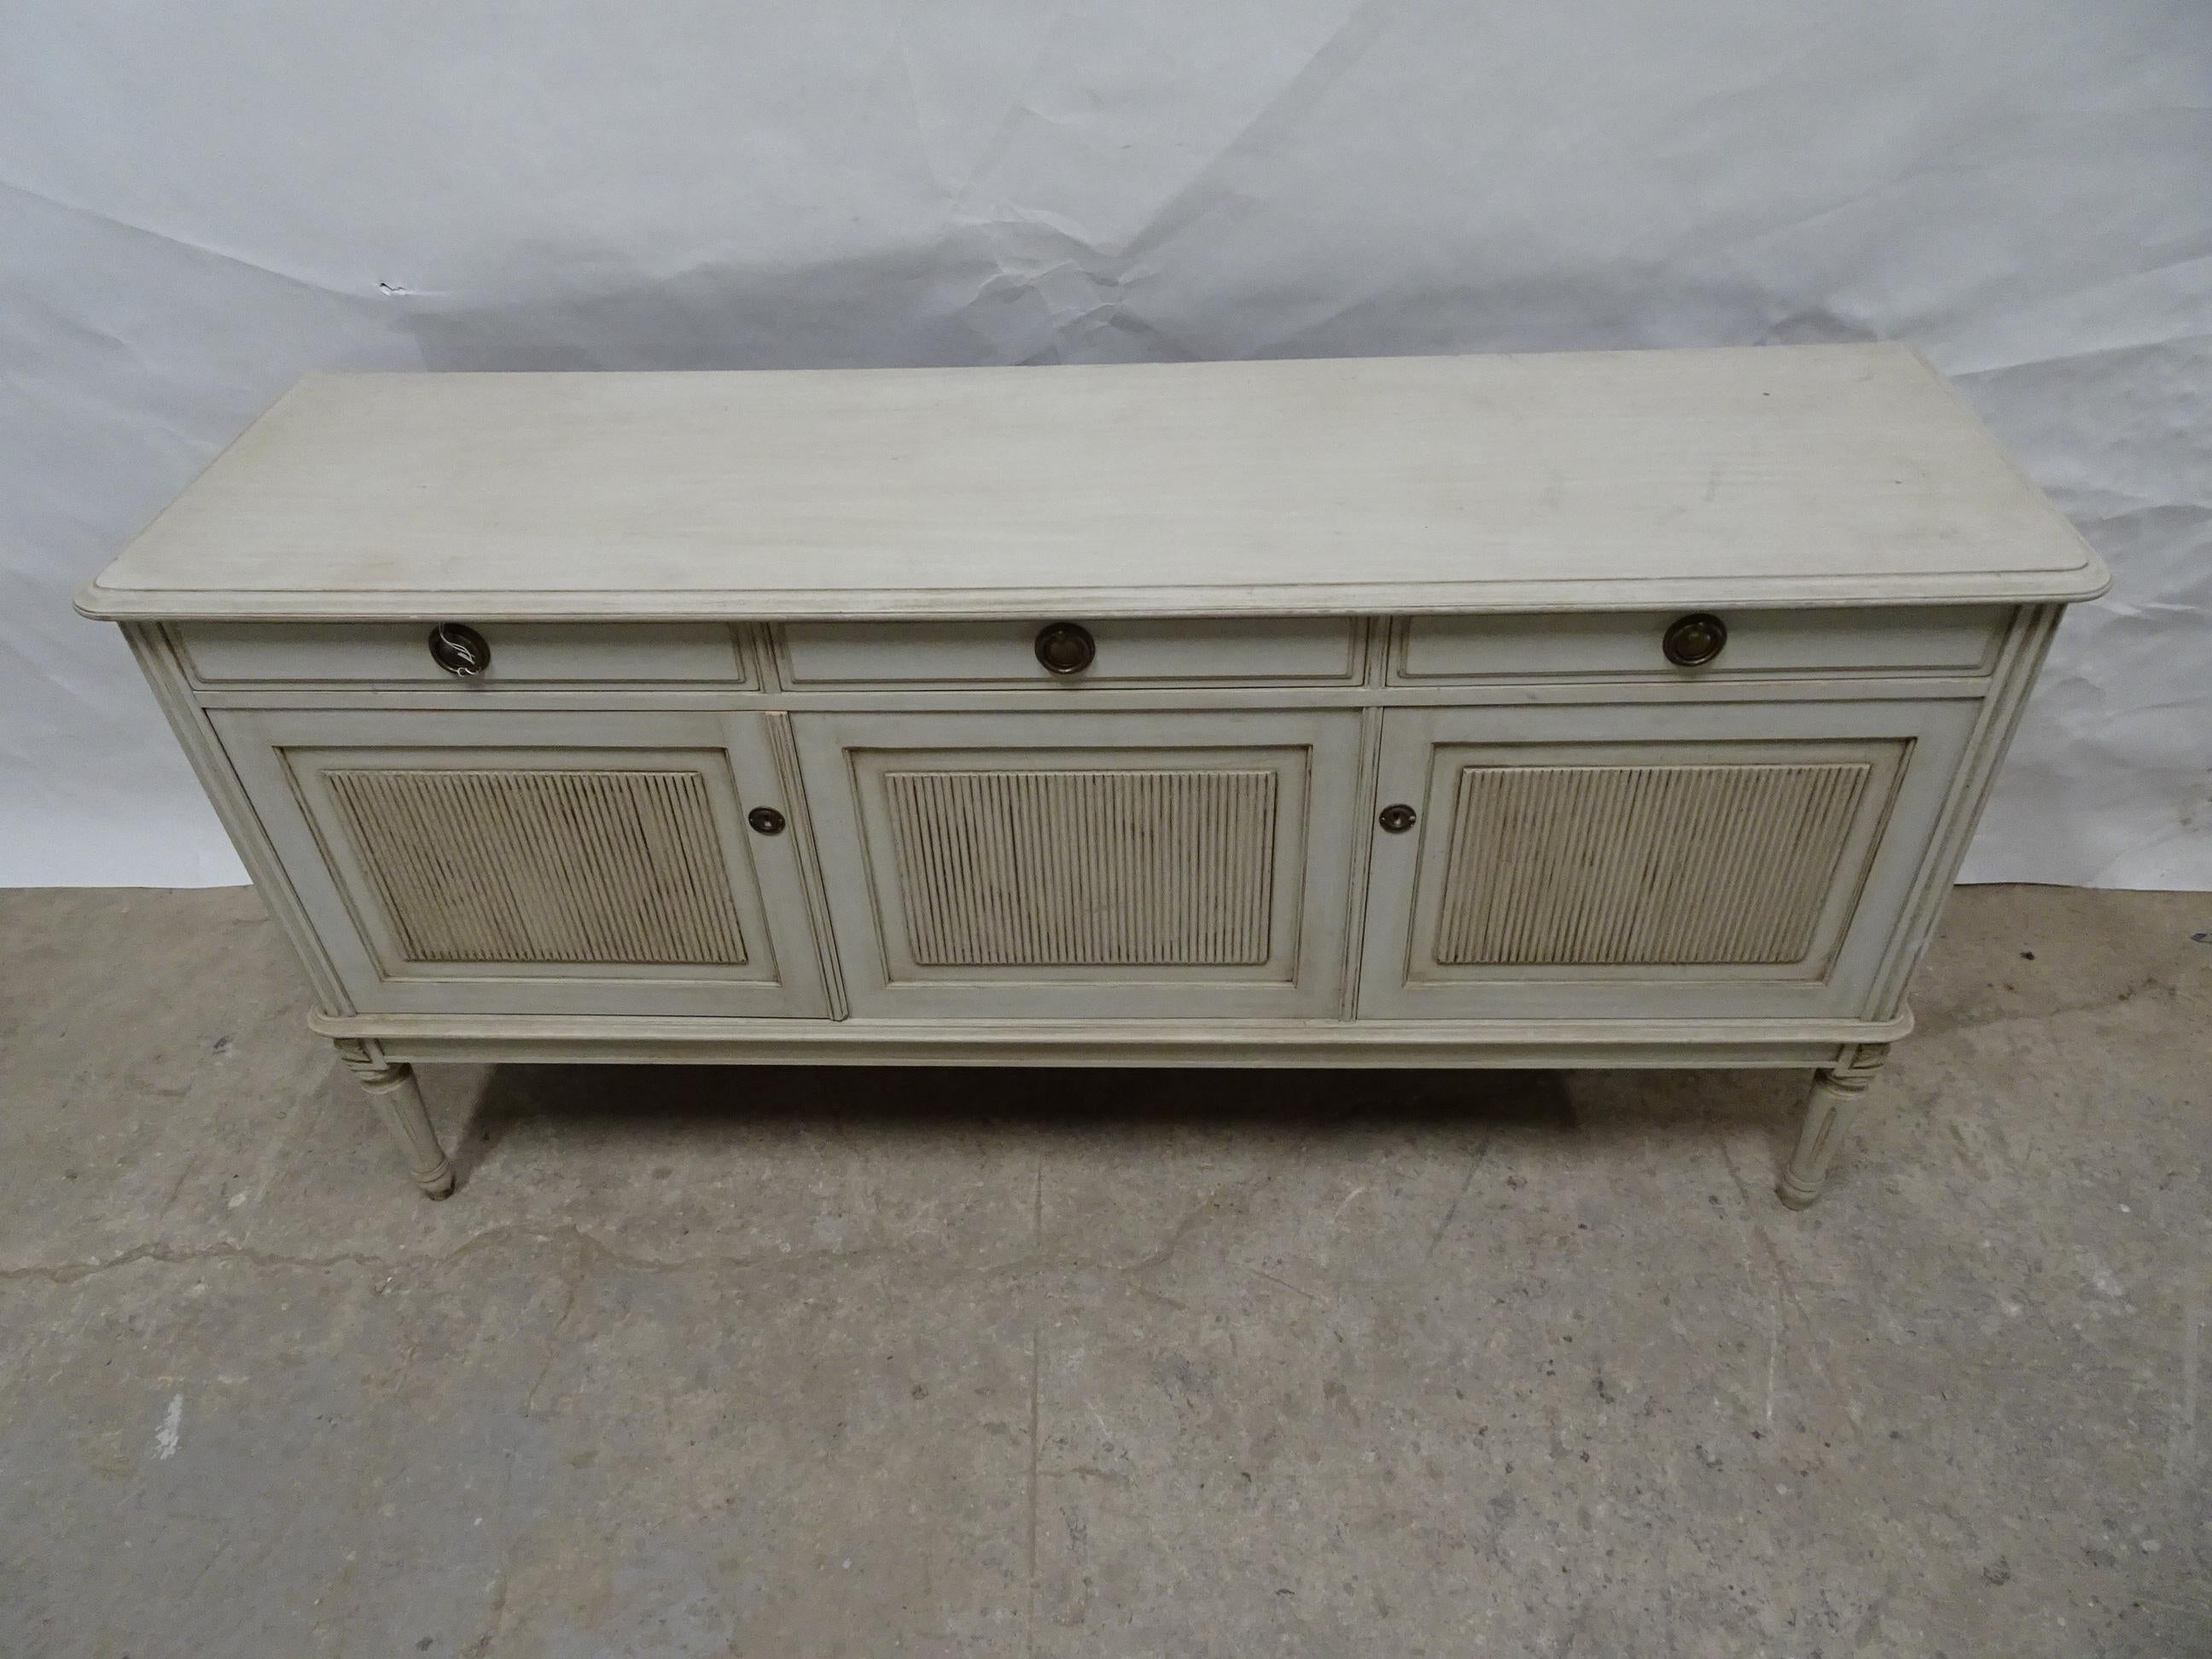 This is a Swedish Gustavian side board. It’s been restored and repainted with milk paints 